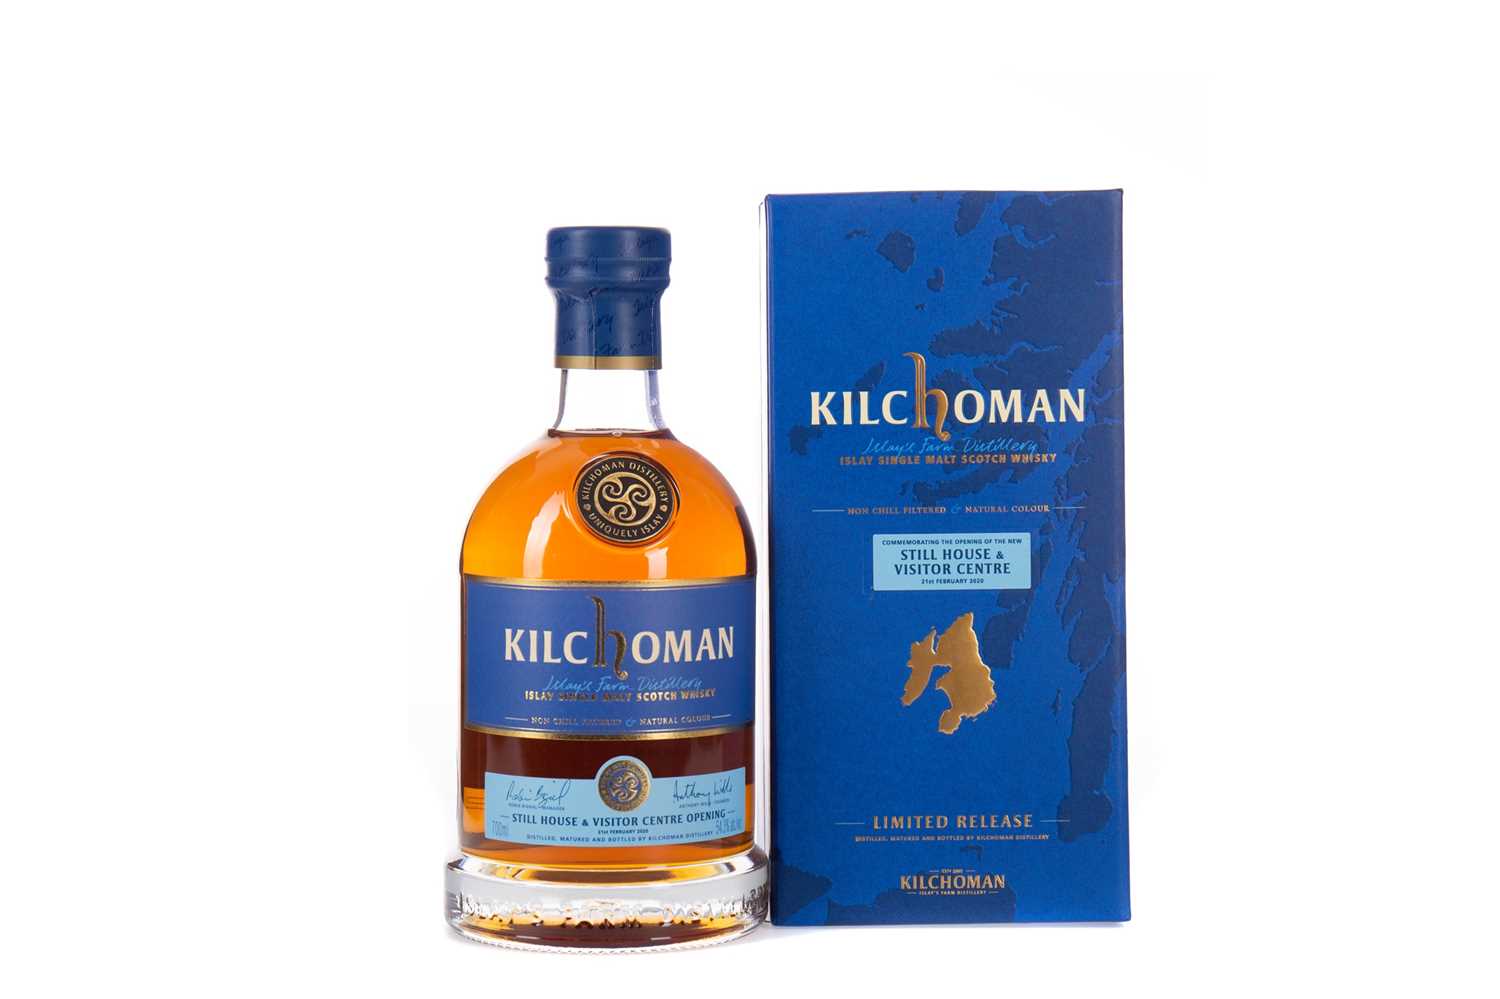 Lot 79 - KILCHOMAN STILL HOUSE & VISITOR CENTRE OPENING AGED 11 YEARS